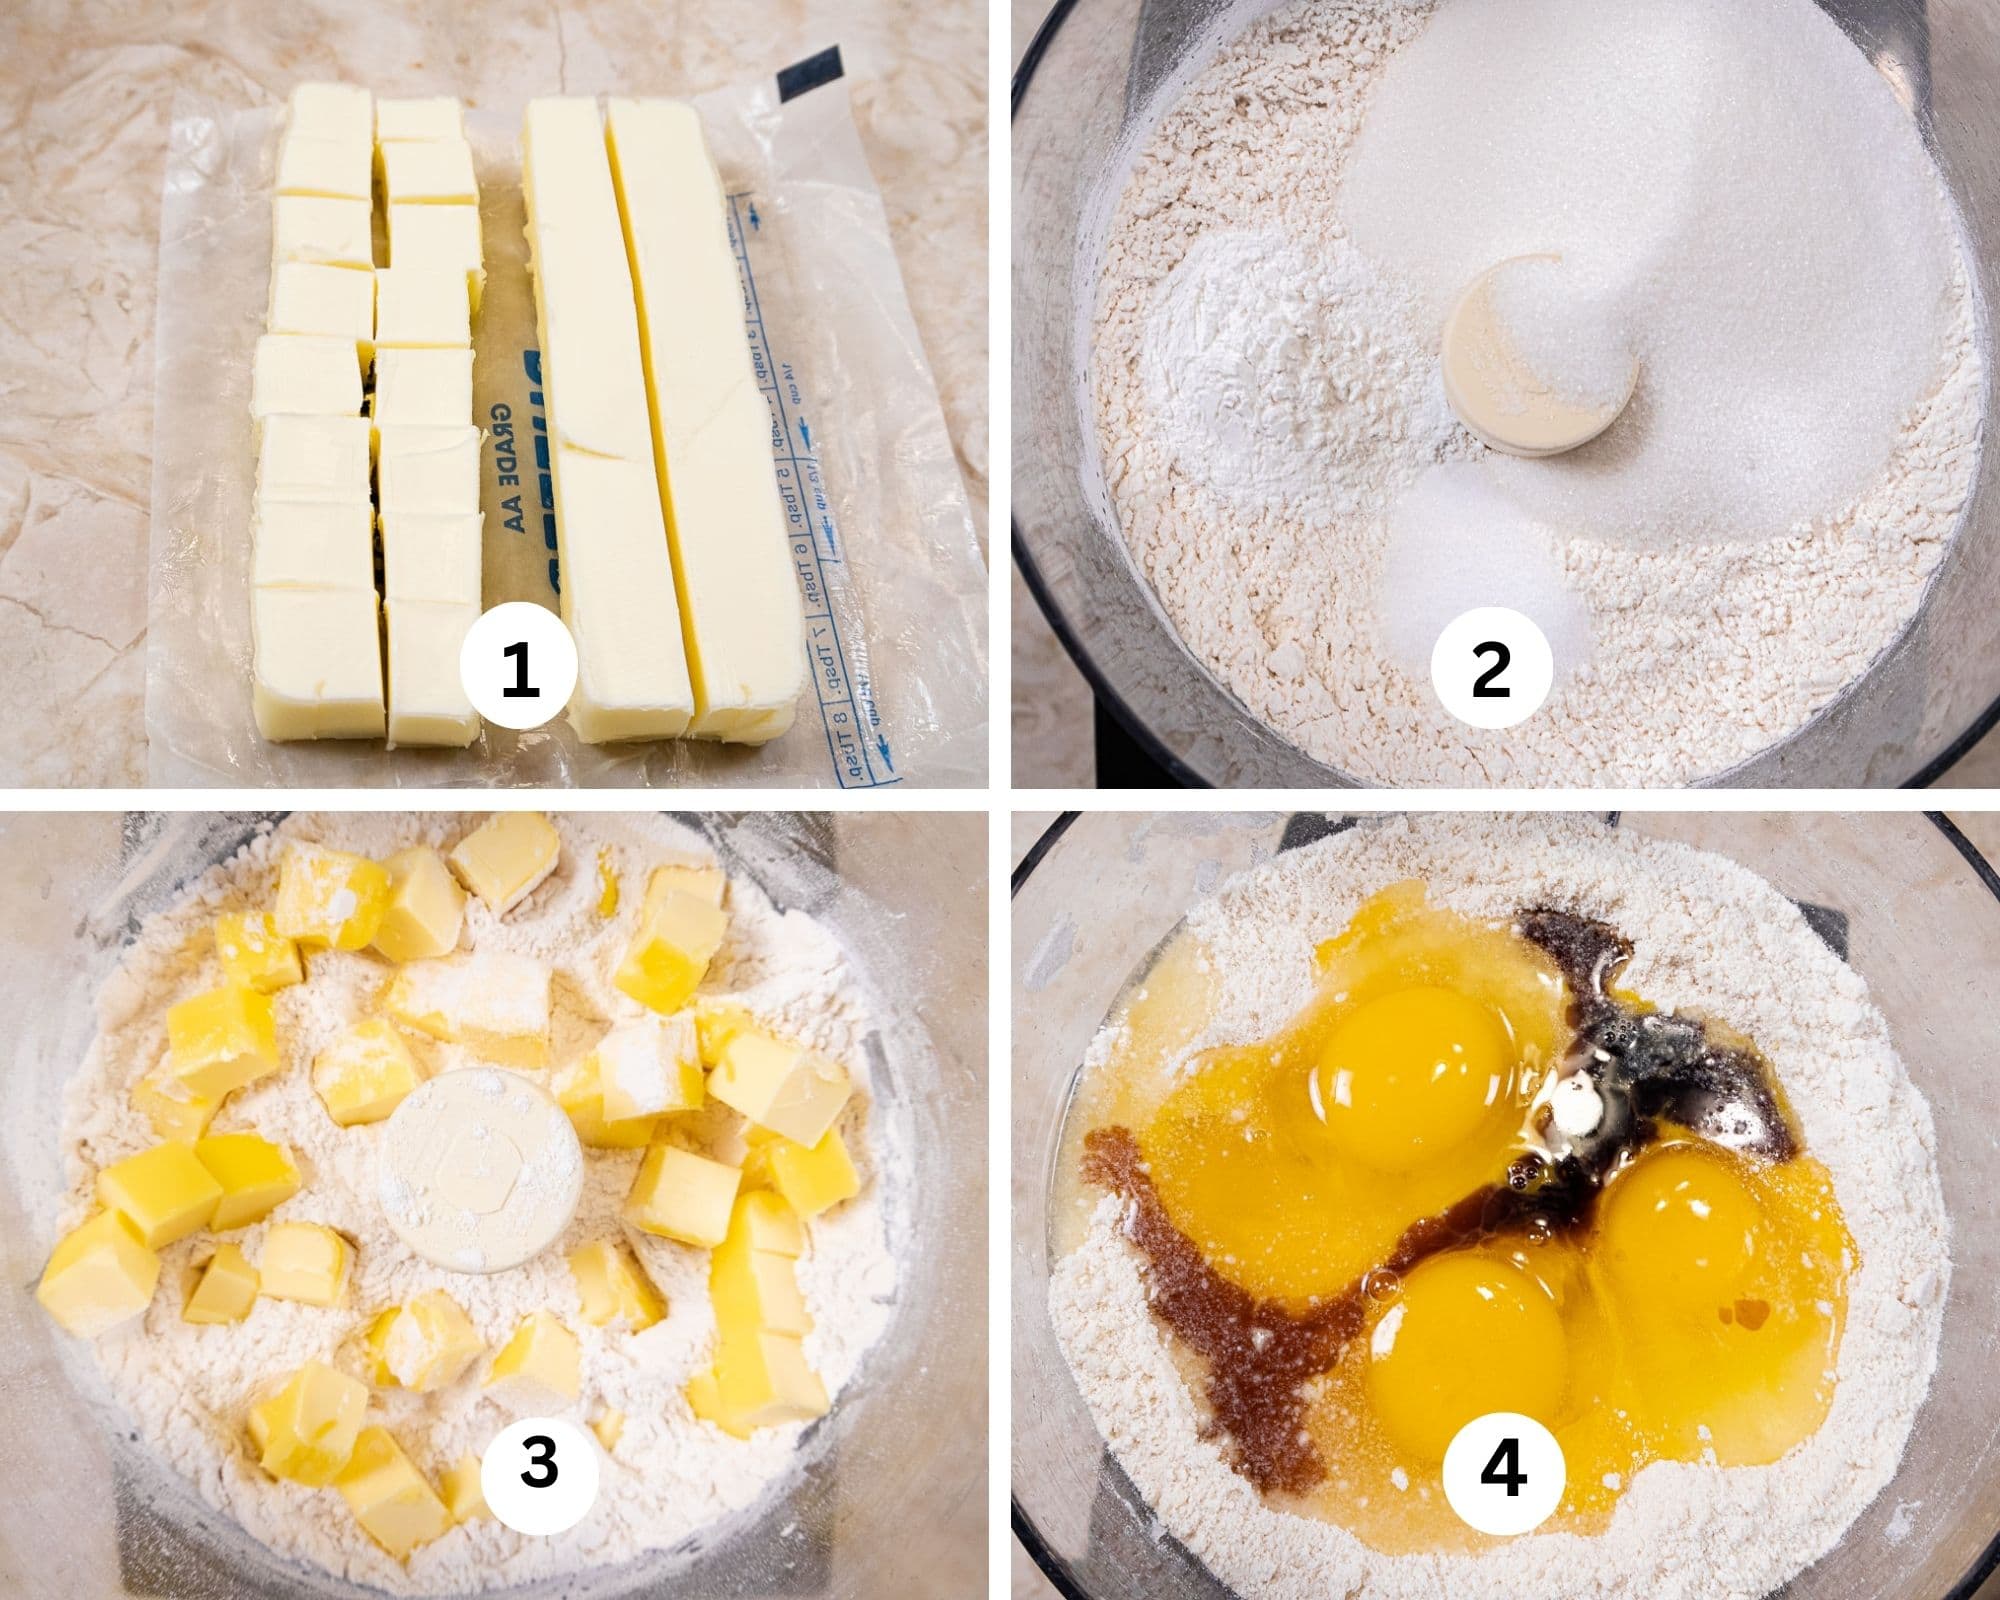 The first Cuccidati collage shows the butter cut, the dry ingredients in the processor, the butter on top of the dry ingredients and the liquid added to the processor.